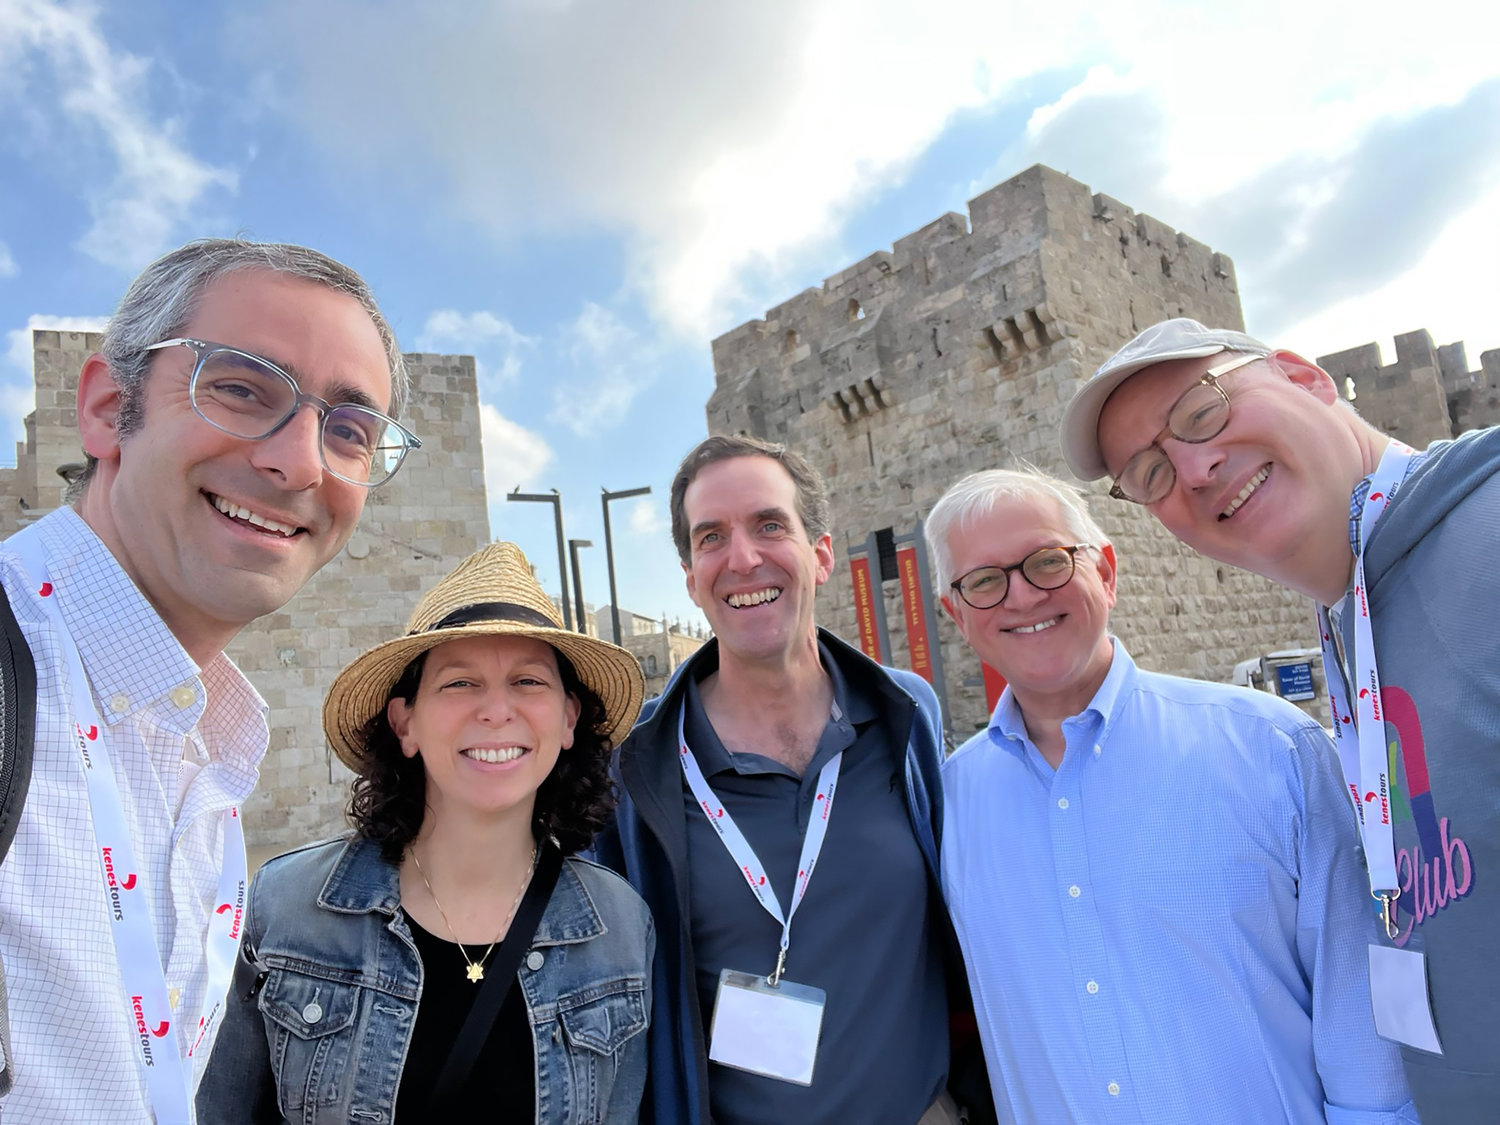 Rabbis who accompanied U.S. Rep. Ritchie Torres visit the Israeli holy land earlier this month. In addition to the rabbis, community members representing organizations such as the Riverdale Y were present.